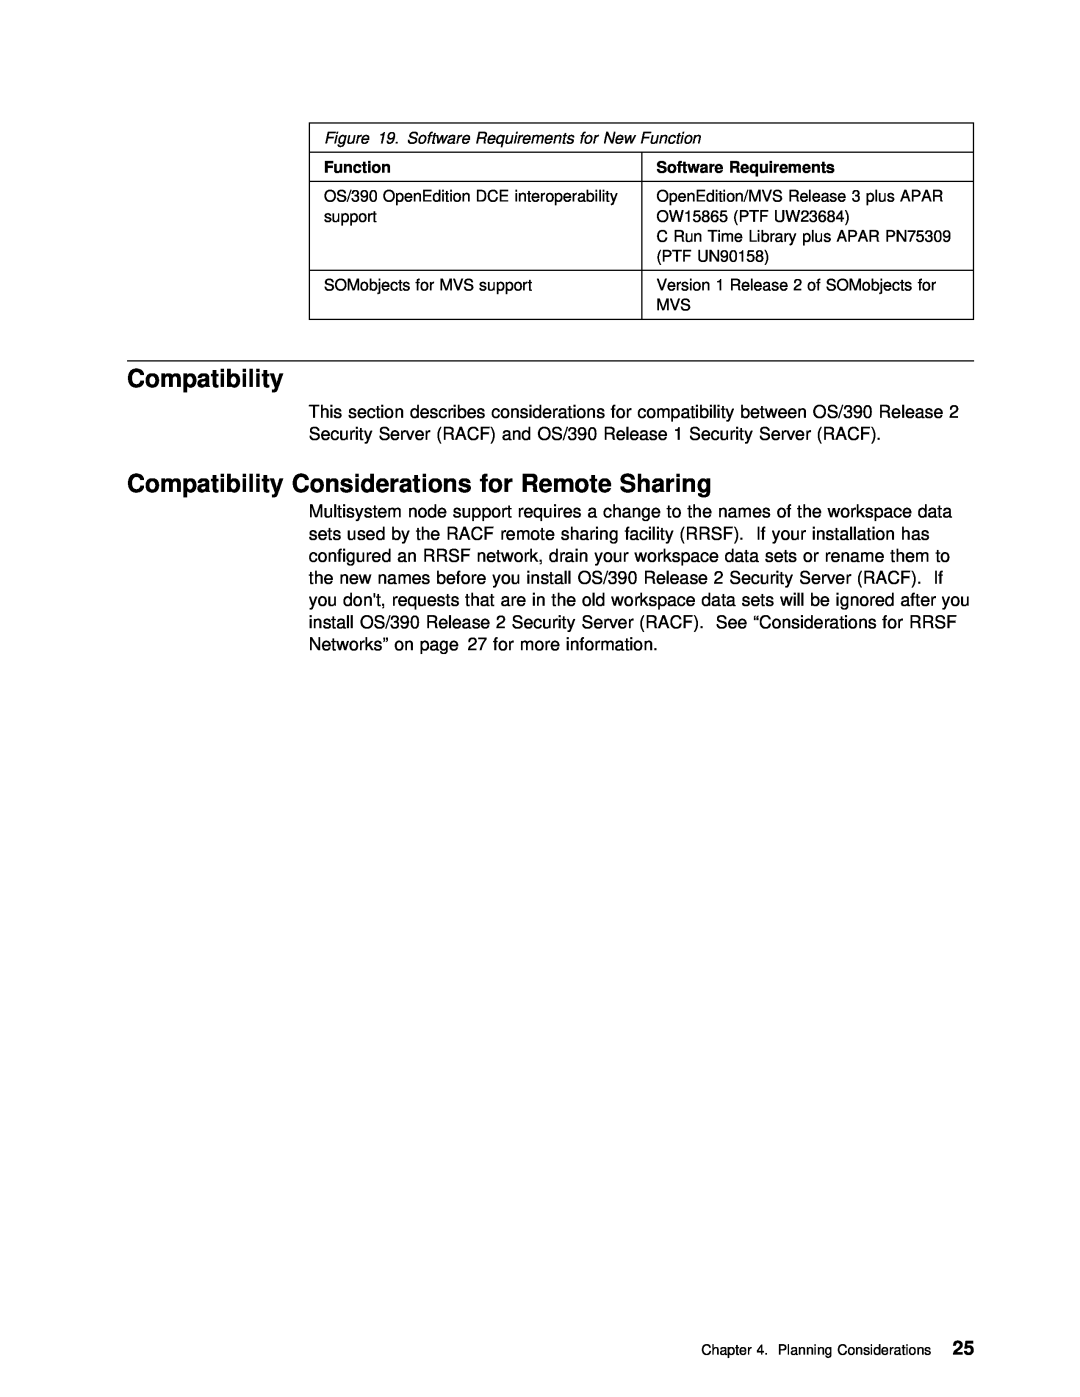 IBM GC28-1920-01 manual Compatibility Considerations for Remote Sharing, Requirements 